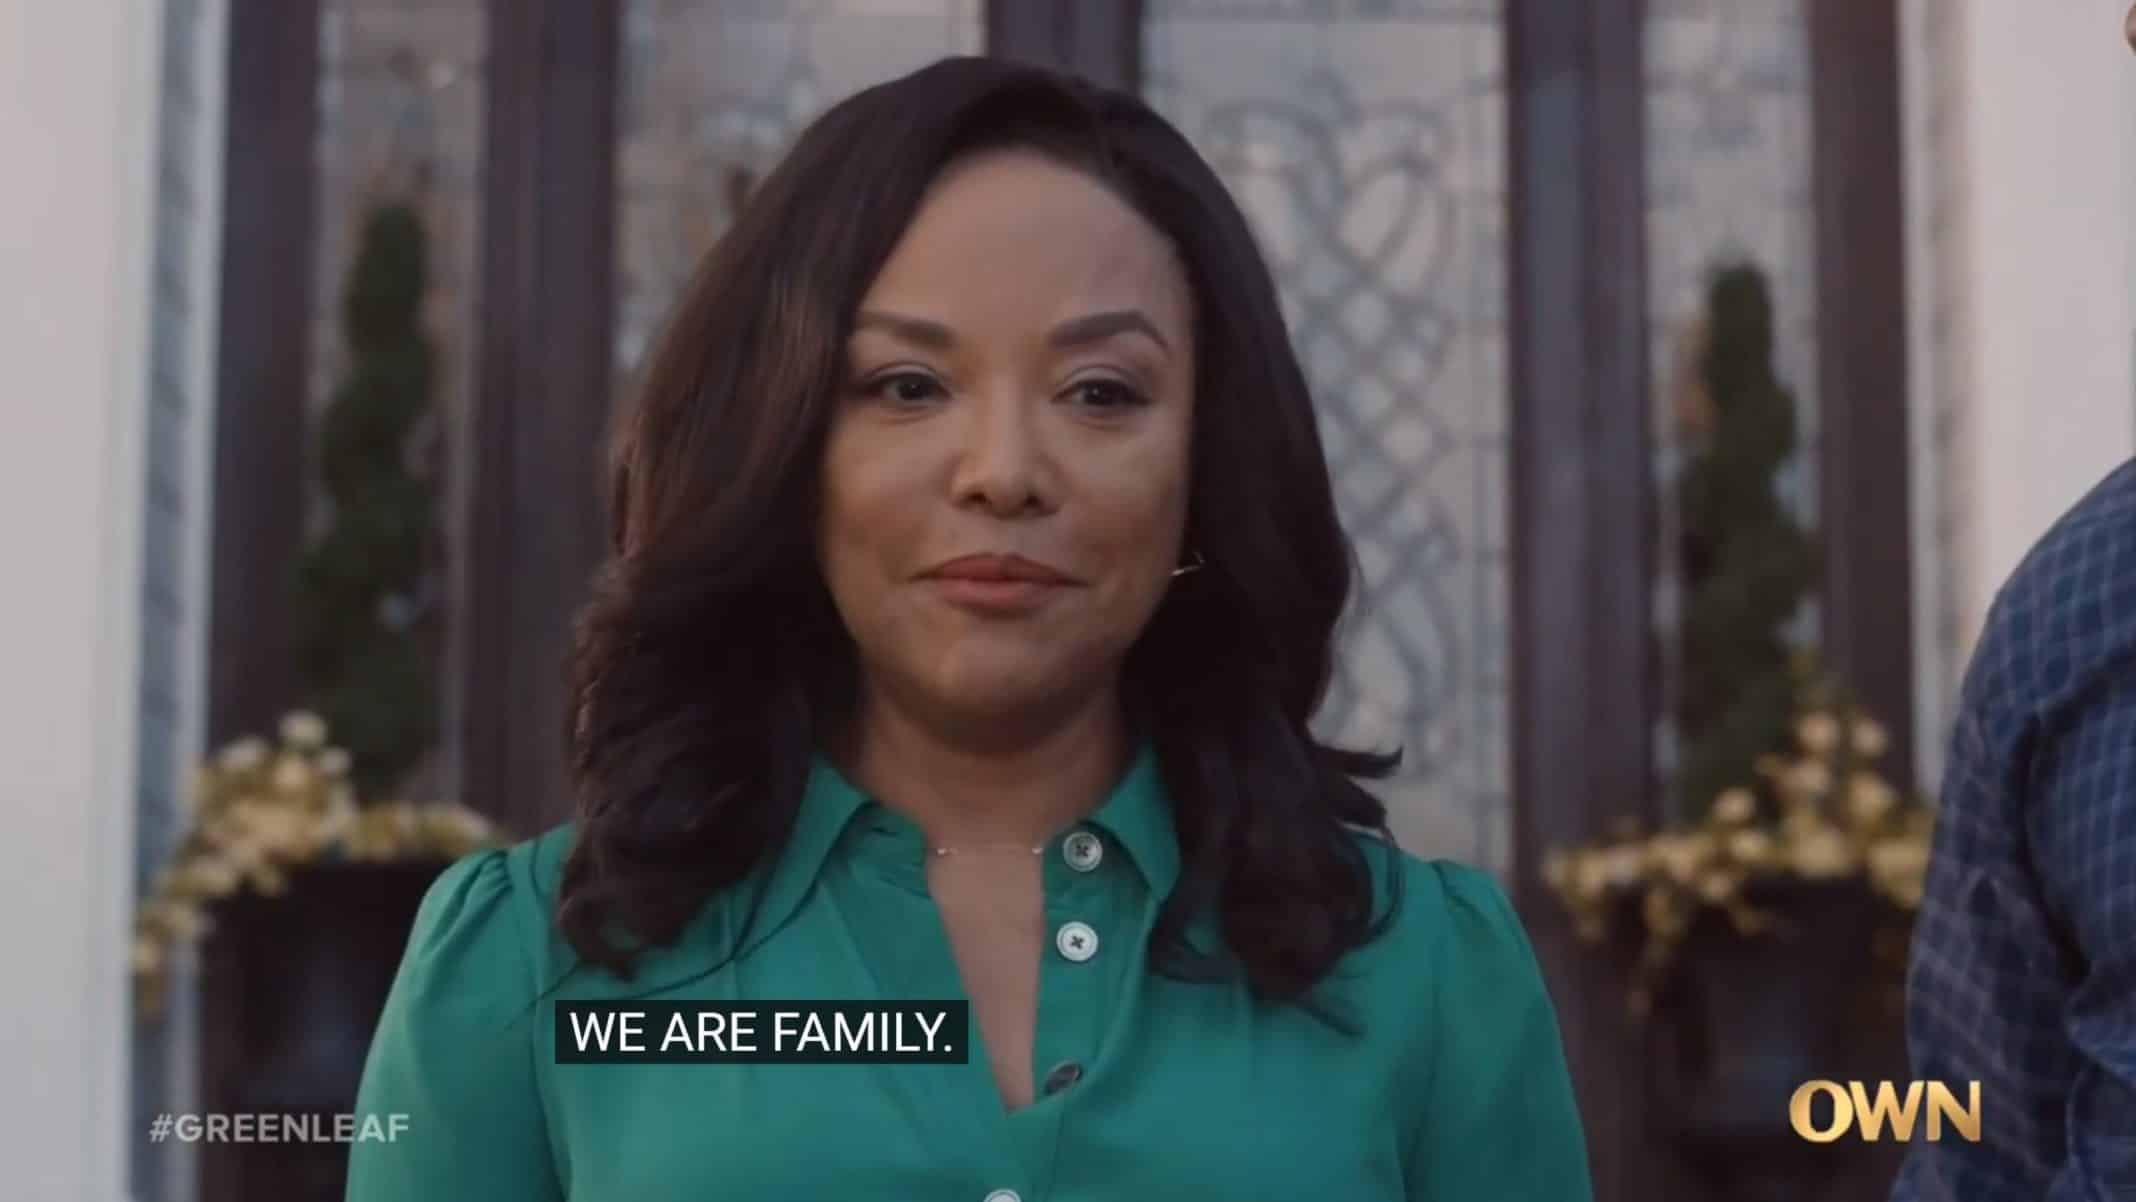 Mae noting that "We are family" before dropping a bomb.